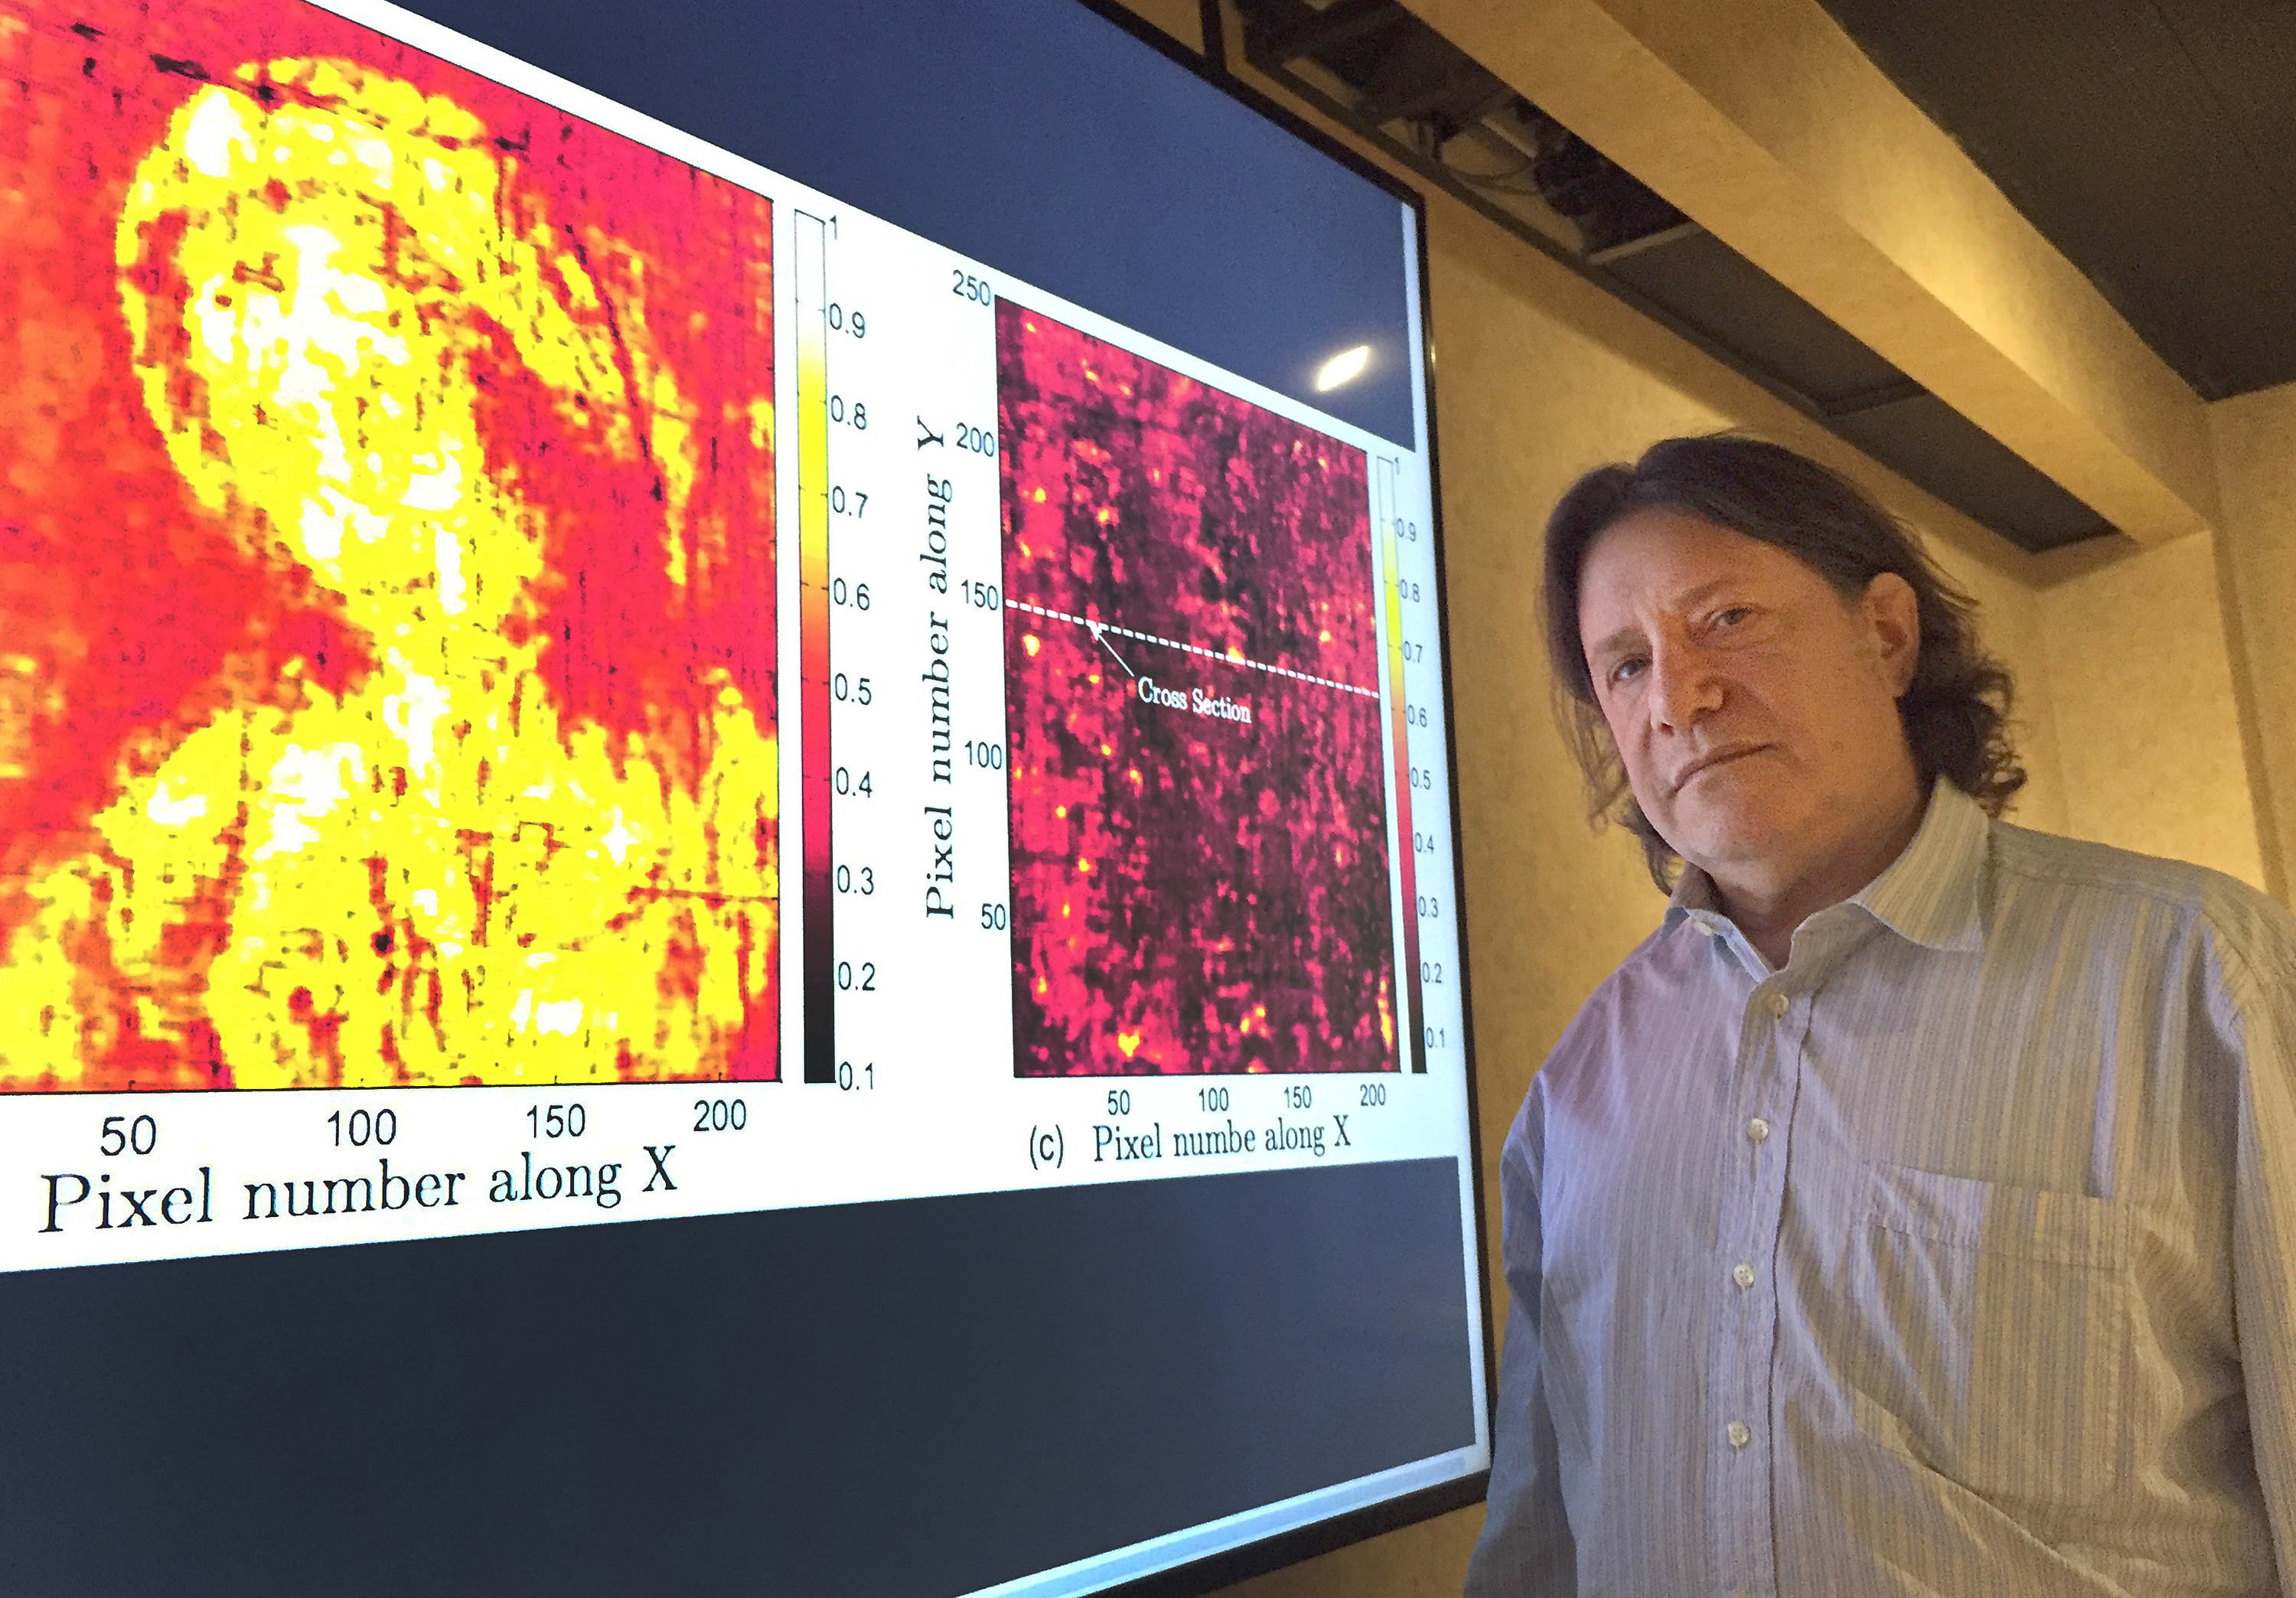 Georgia Tech professor David Citrin is shown with images produced by a terahertz imaging technique. Researchers studied a 17th century painting using a terahertz reflectometry technique to analyze individual paint layers.(Credit: John Toon, Georgia Tech)